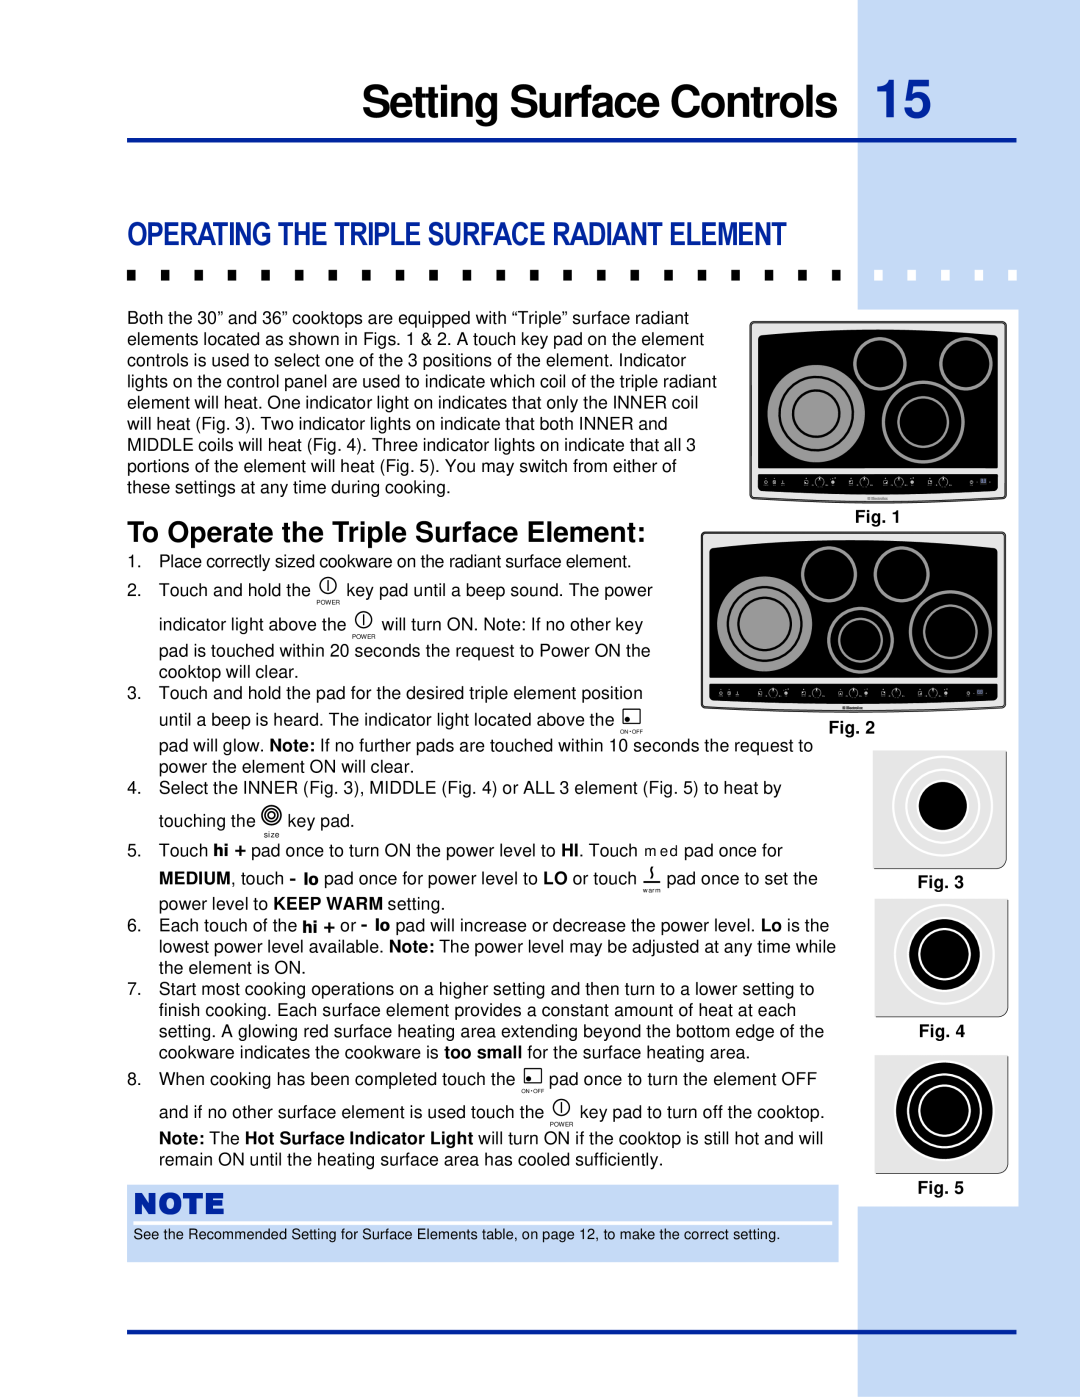 Electrolux 36 manual Operating The Triple Surface Radiant Element, To Operate the Triple Surface Element 